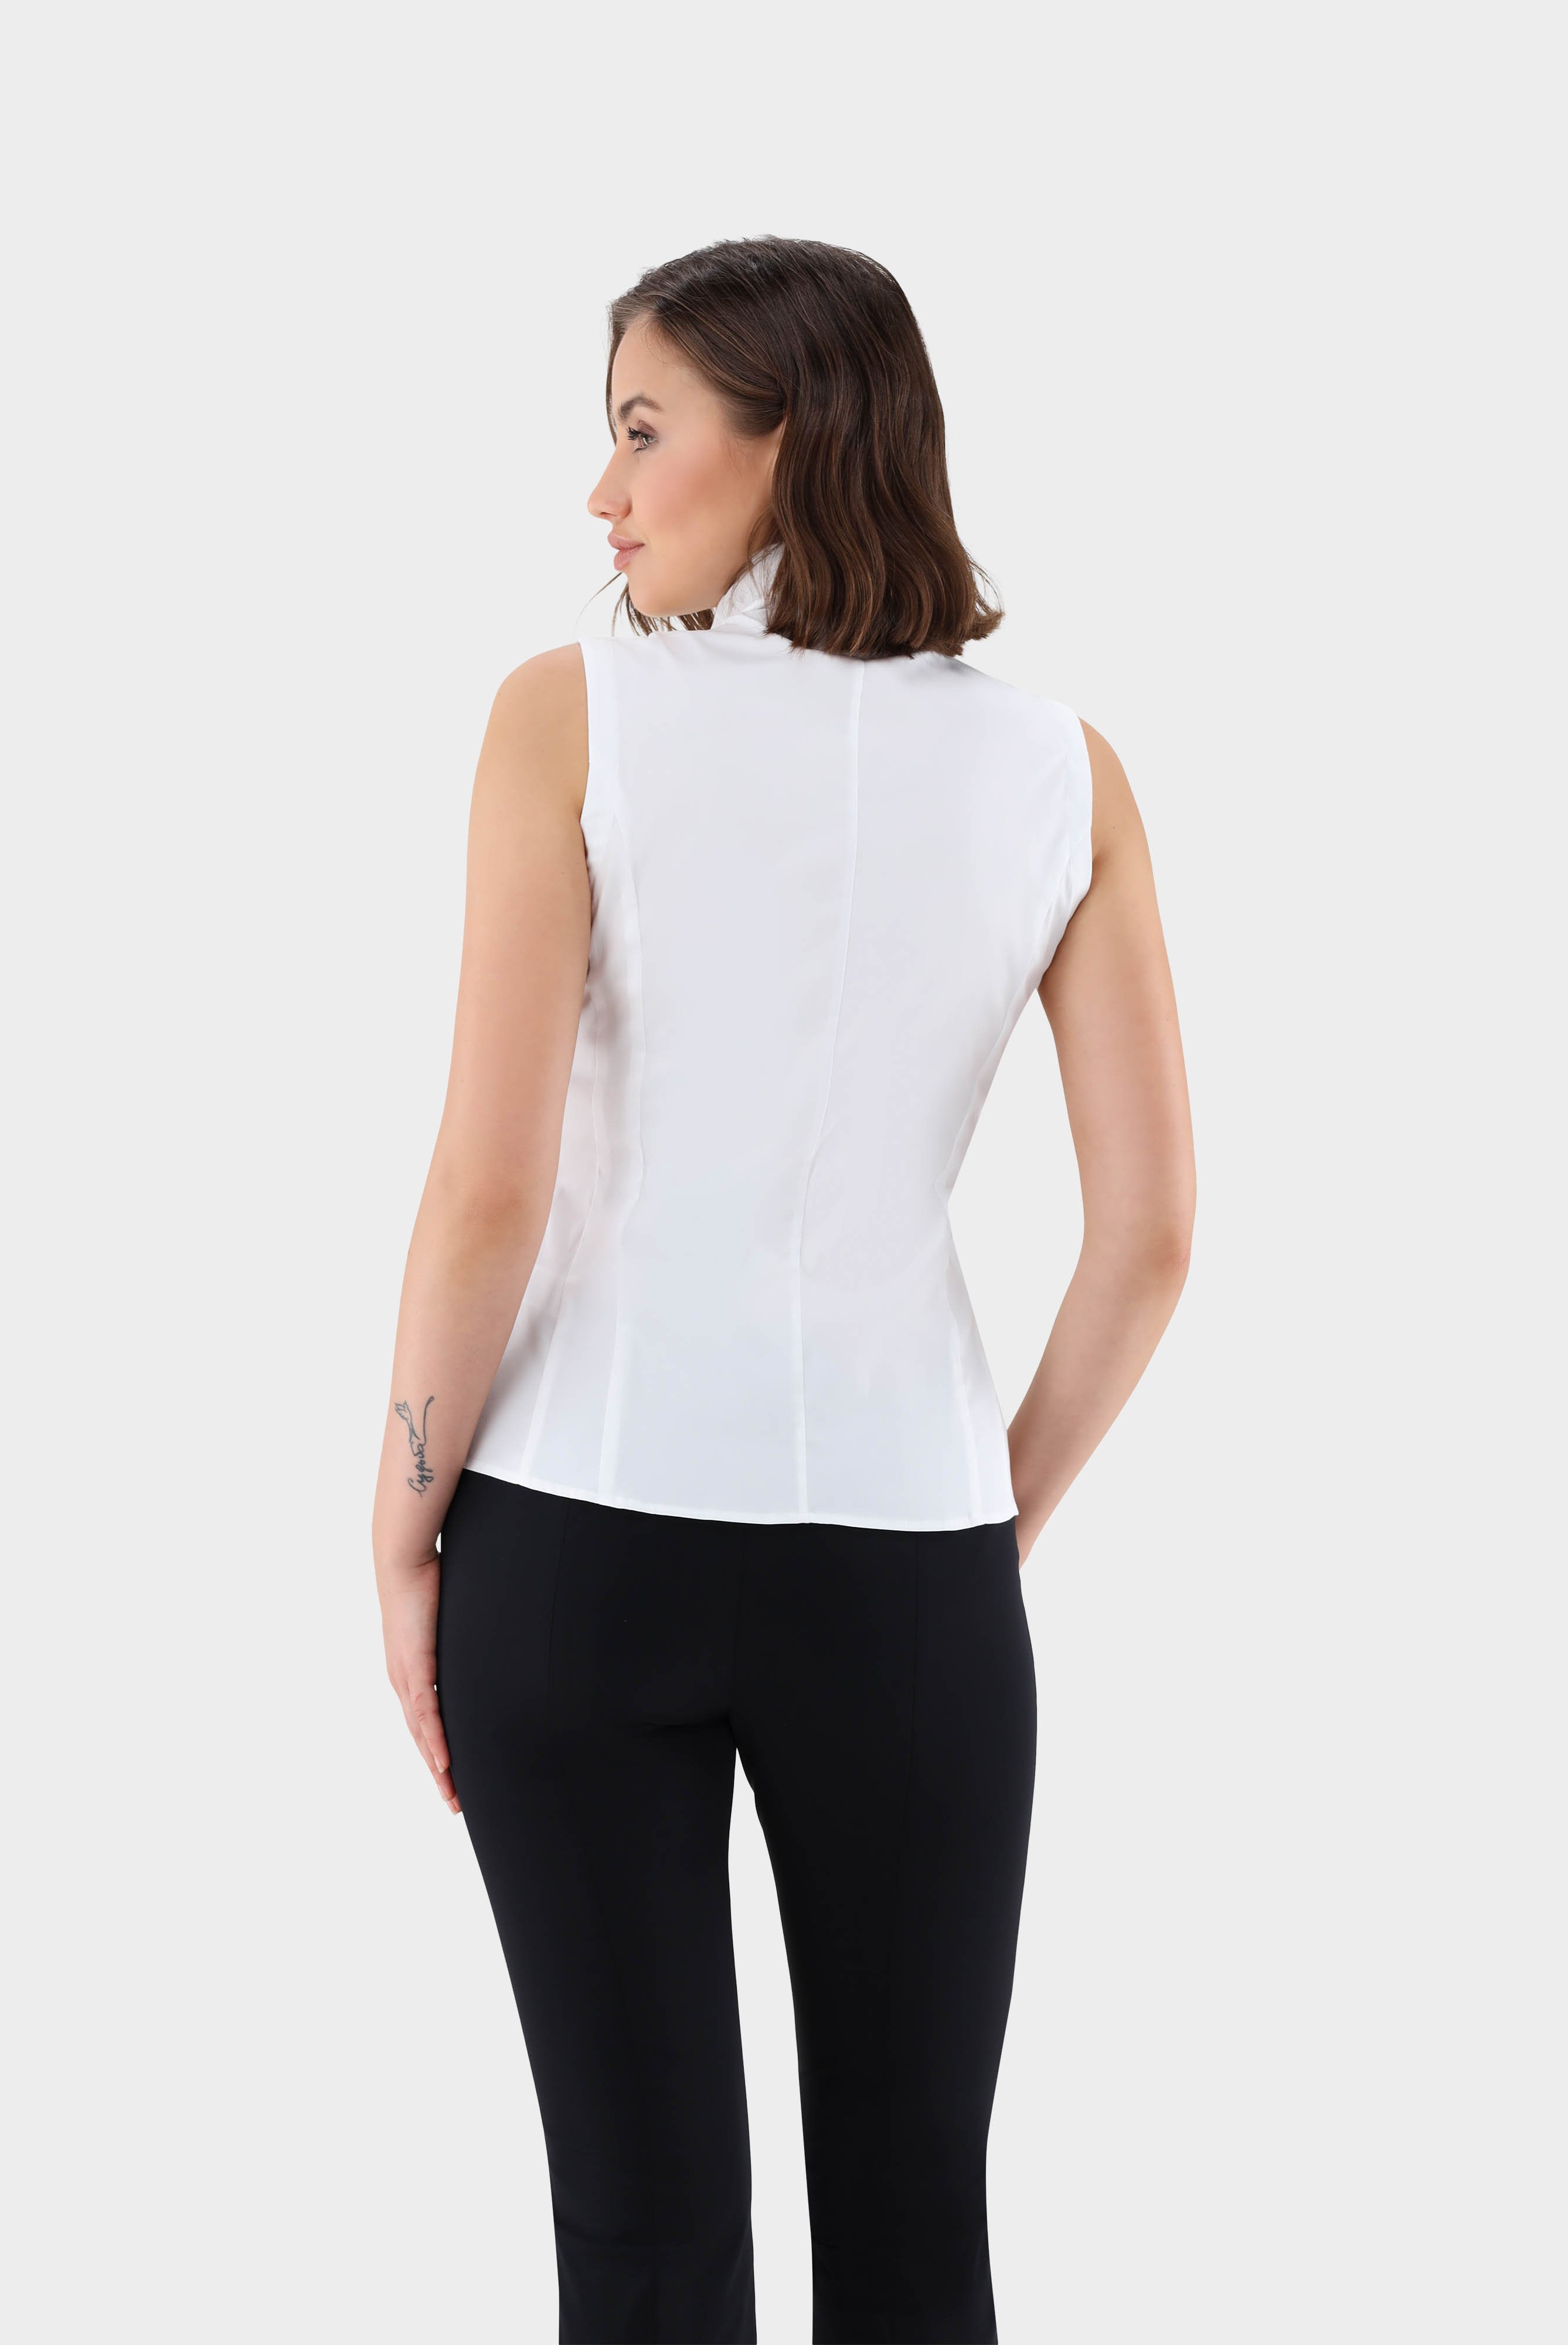 Business Blouses+Sleevless Chalice Collar Blouse+05.5857.73.130830.000.32